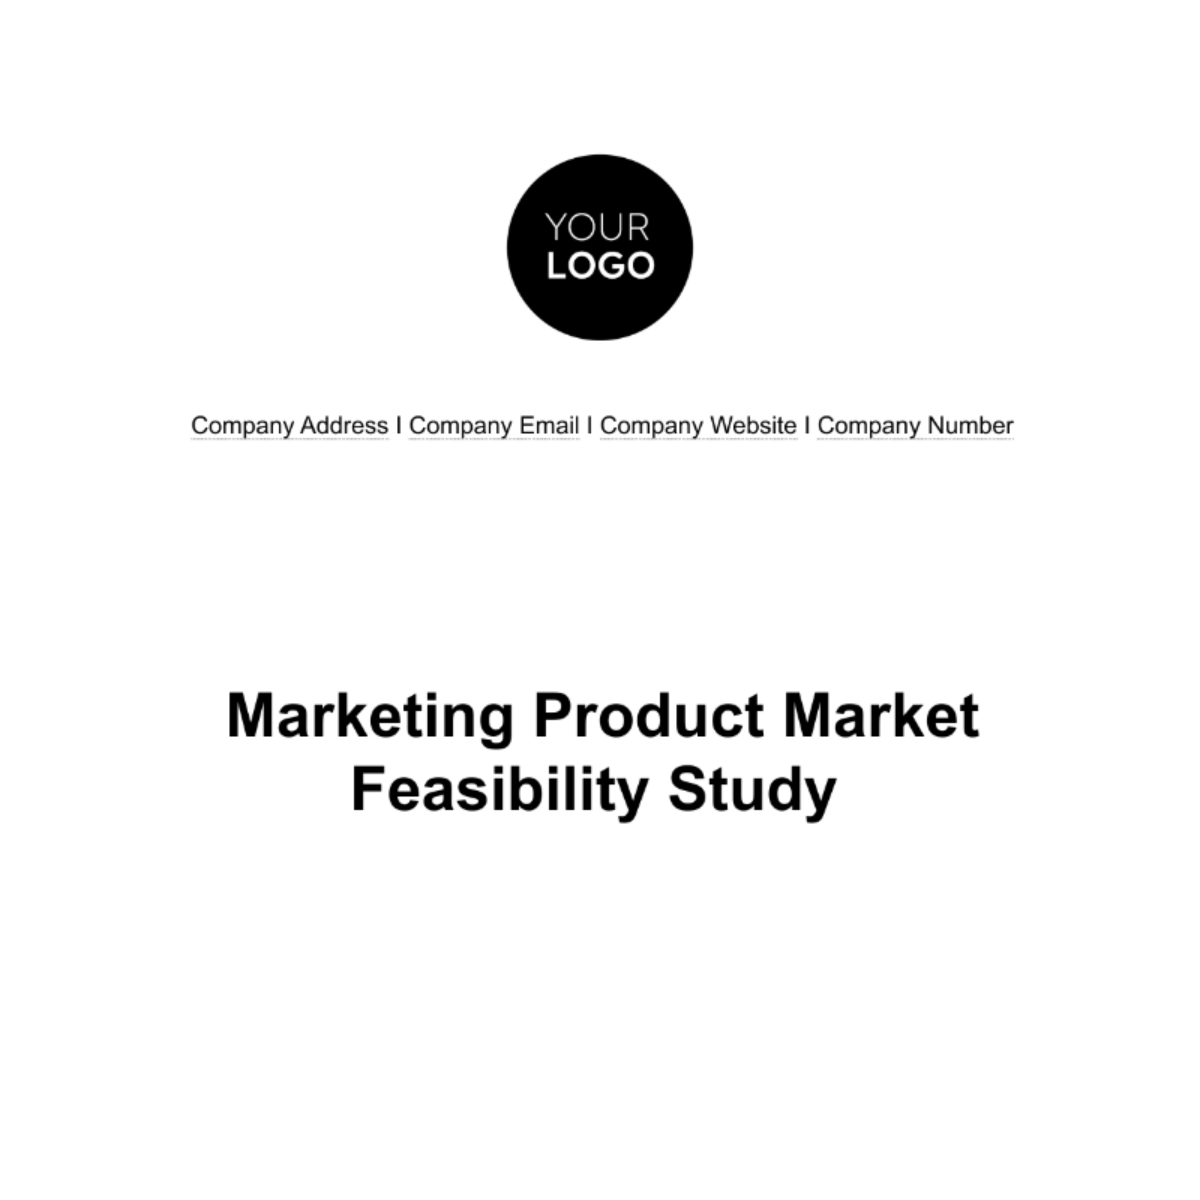 Marketing Product Market Feasibility Study Template